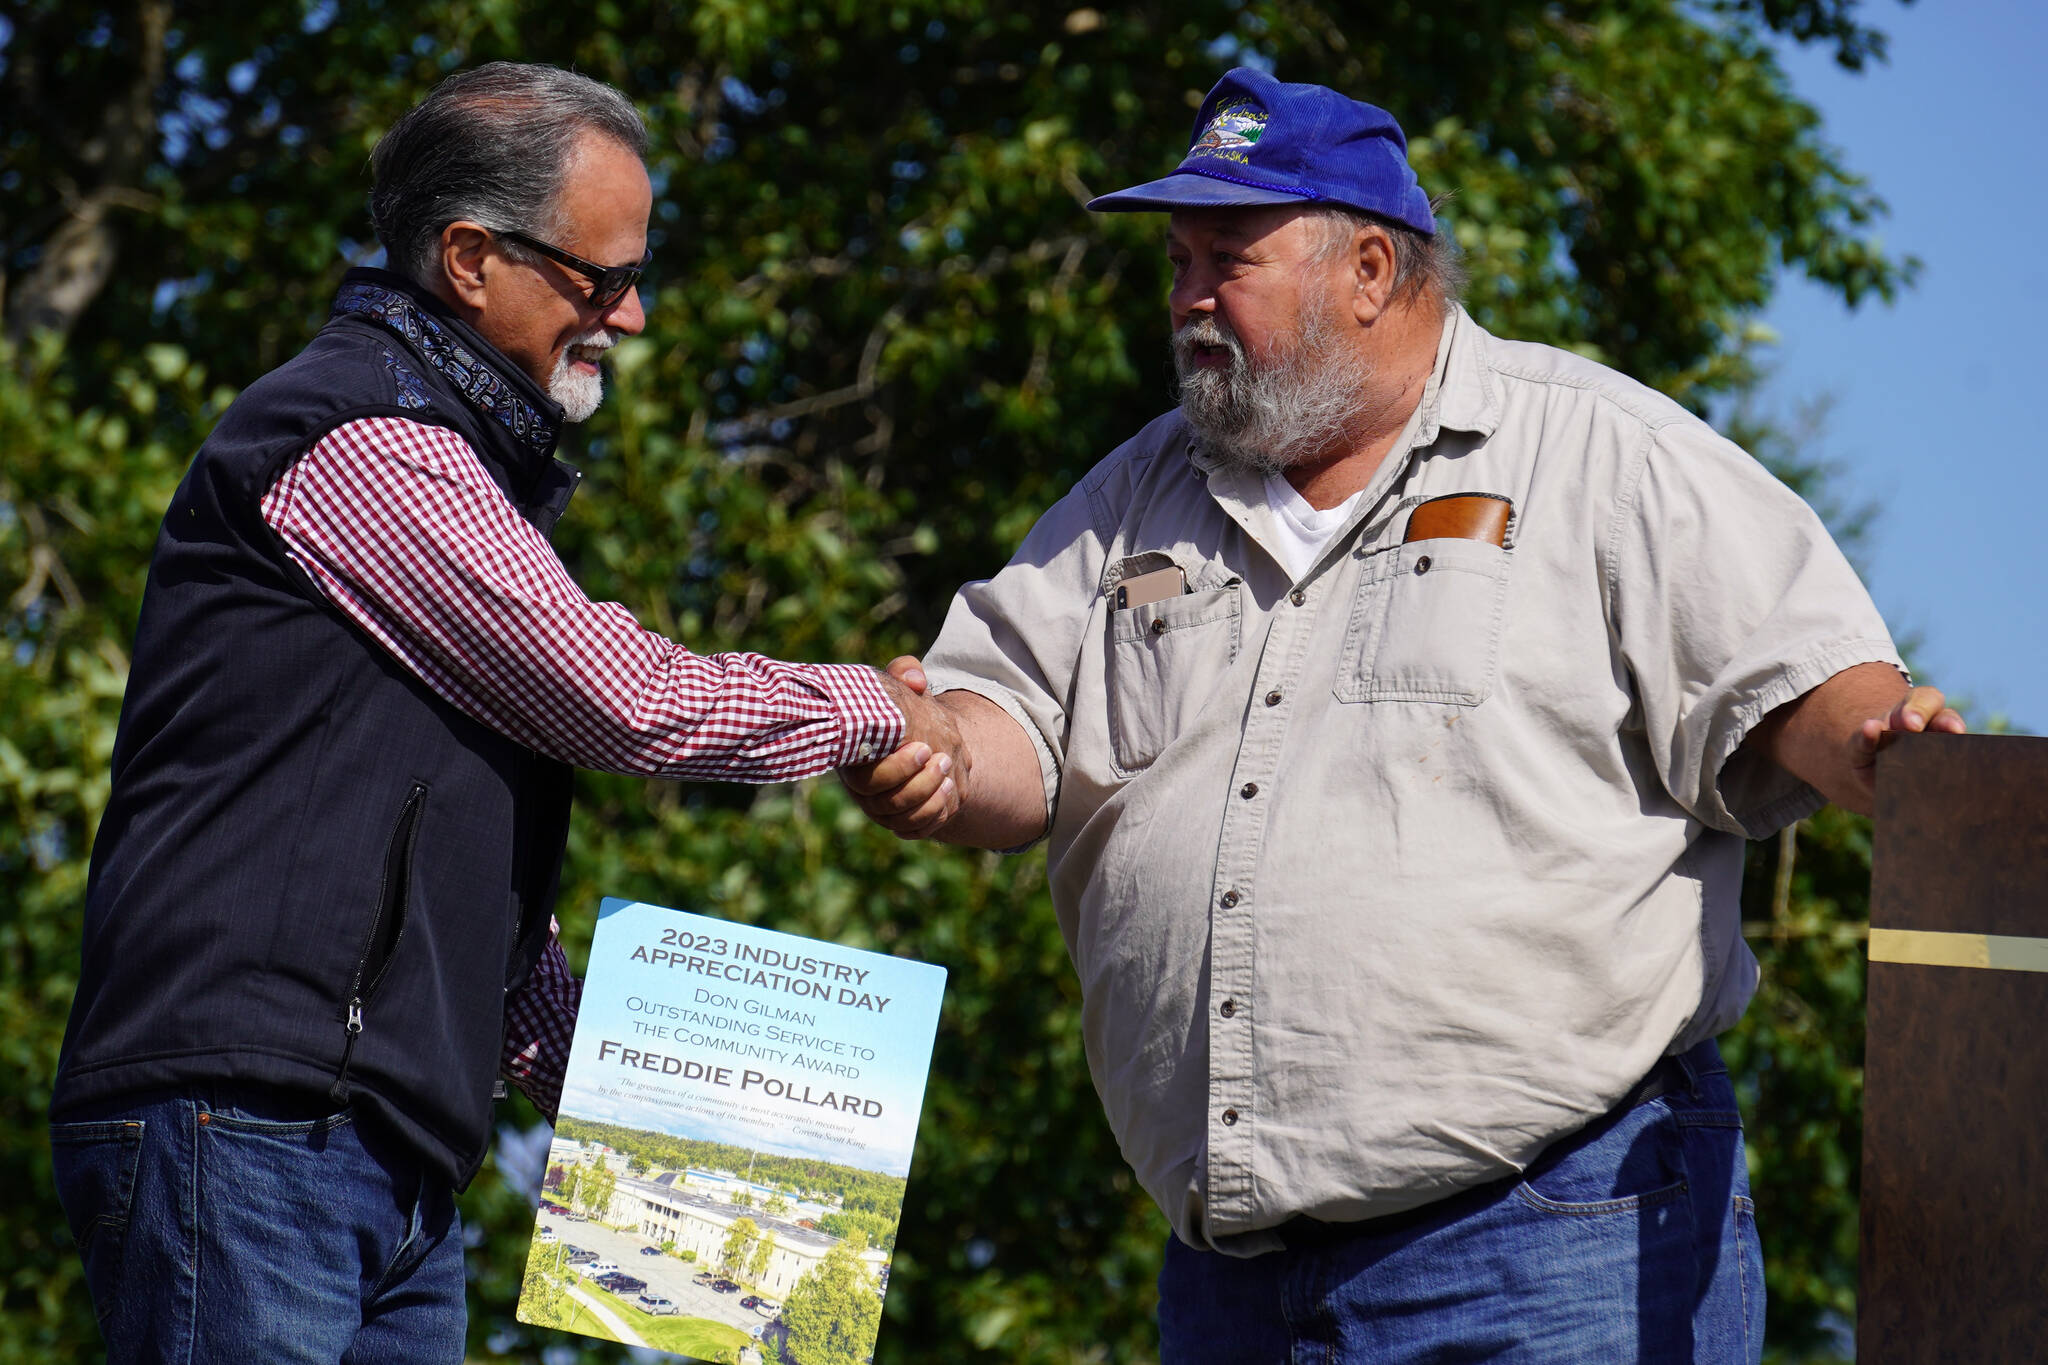 Freddie Pollard Sr., right, receives the Don Gilman Outstanding Service to the Community Award from Kenai Peninsula Borough Mayor Peter Micciche during Industry Appreciation Day festivities at the Kenai softball greenstrip on Saturday, Aug. 19, 2023. (Jake Dye/Peninsula Clarion)